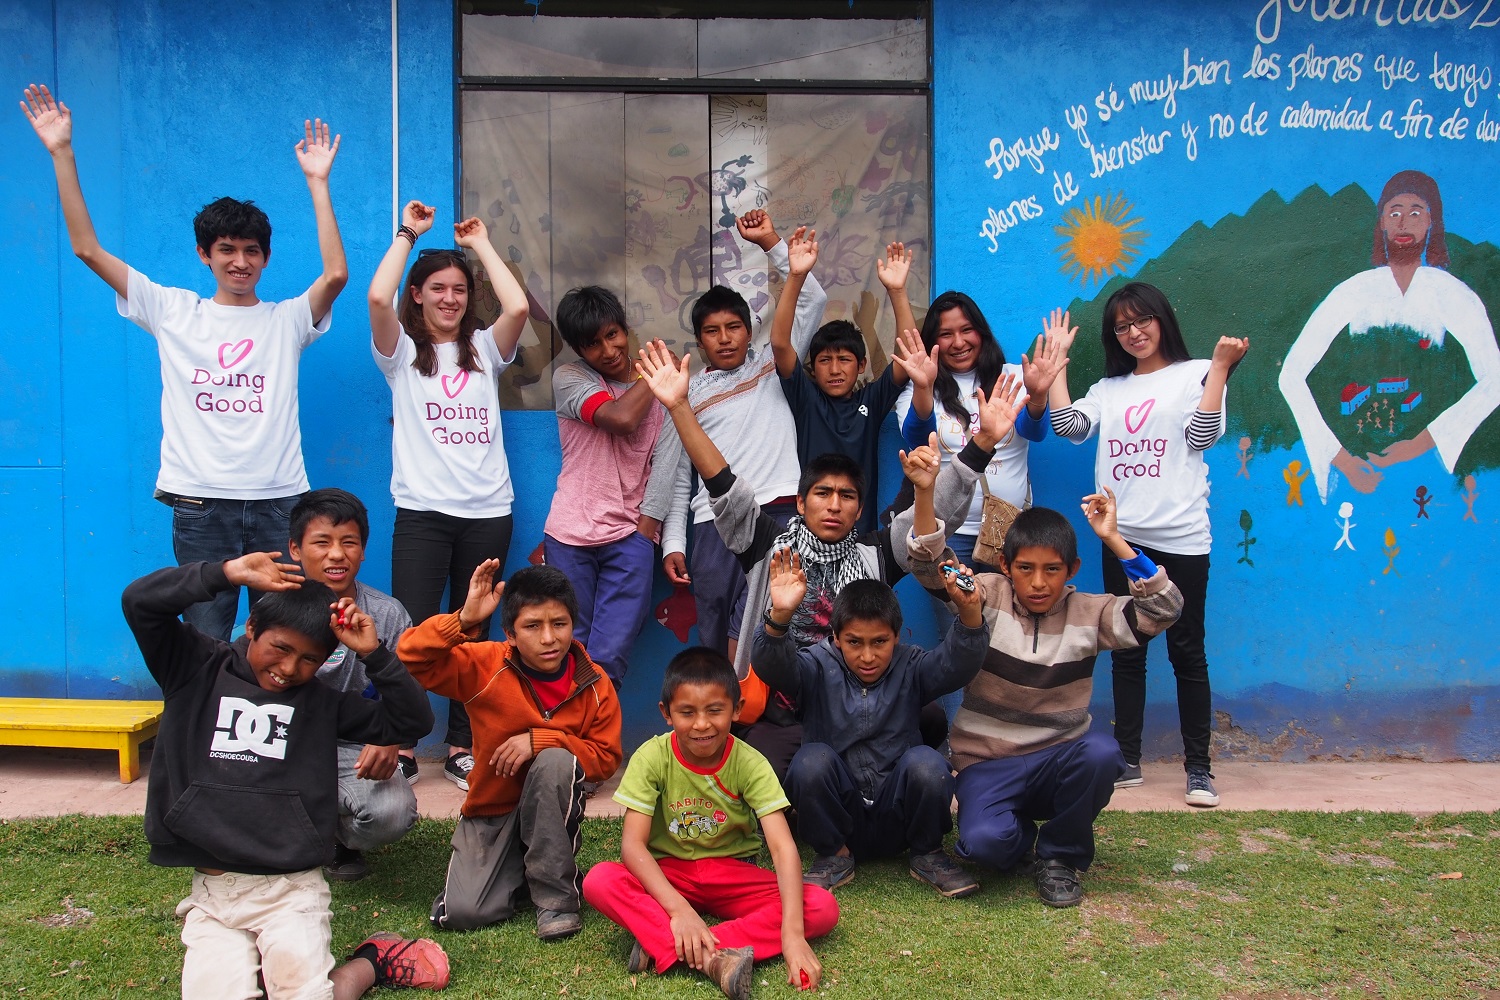 Latin American Foundation for the Future in Peru feeling fulfilled after a Good Deeds Day.